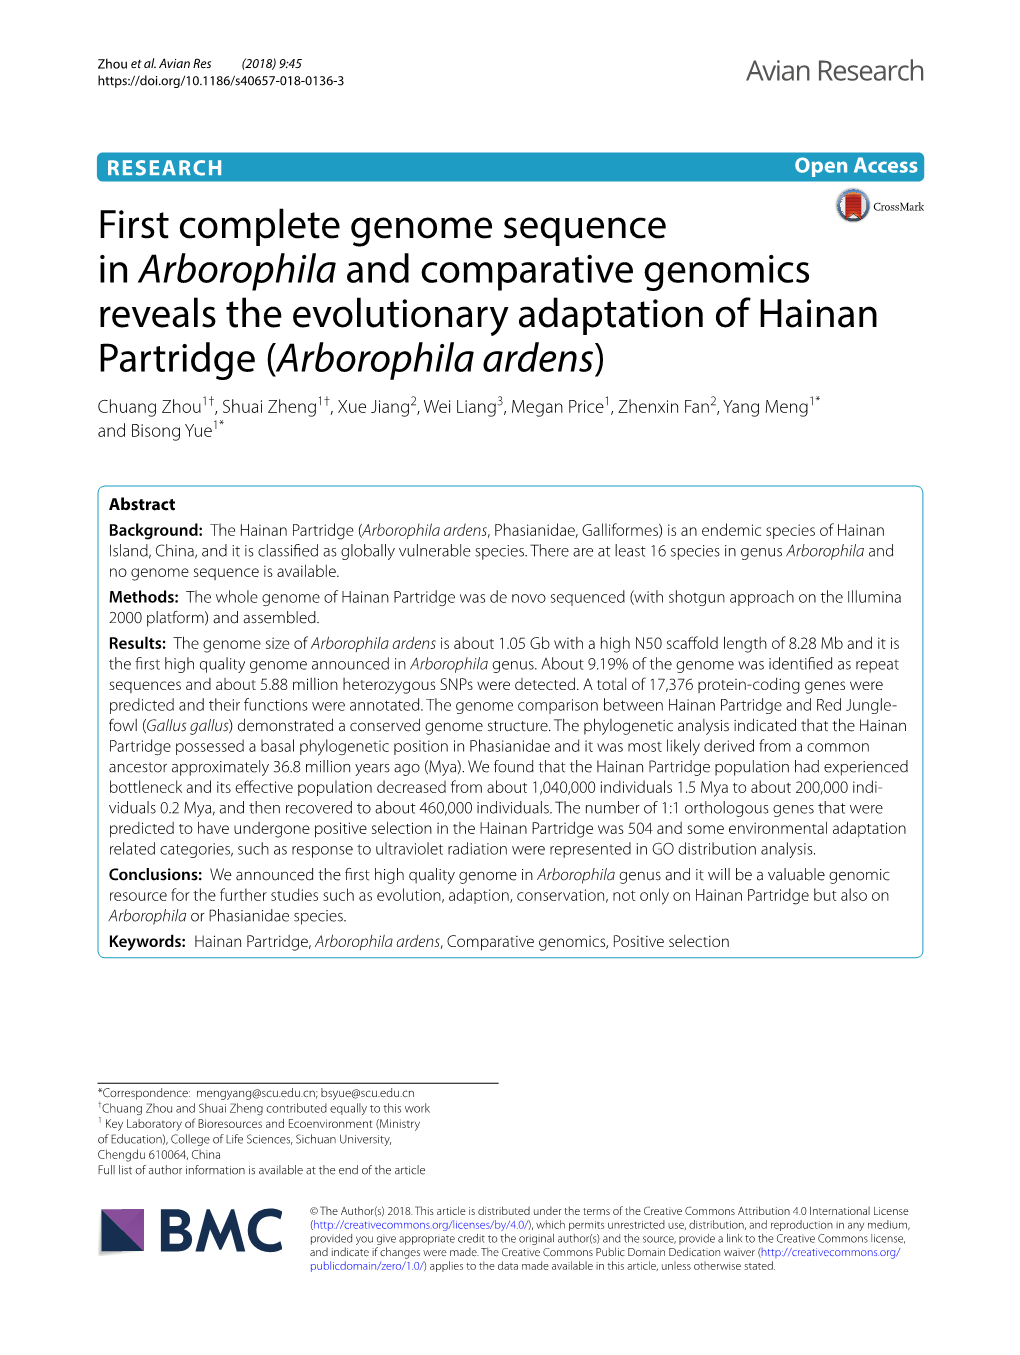 First Complete Genome Sequence in Arborophila And